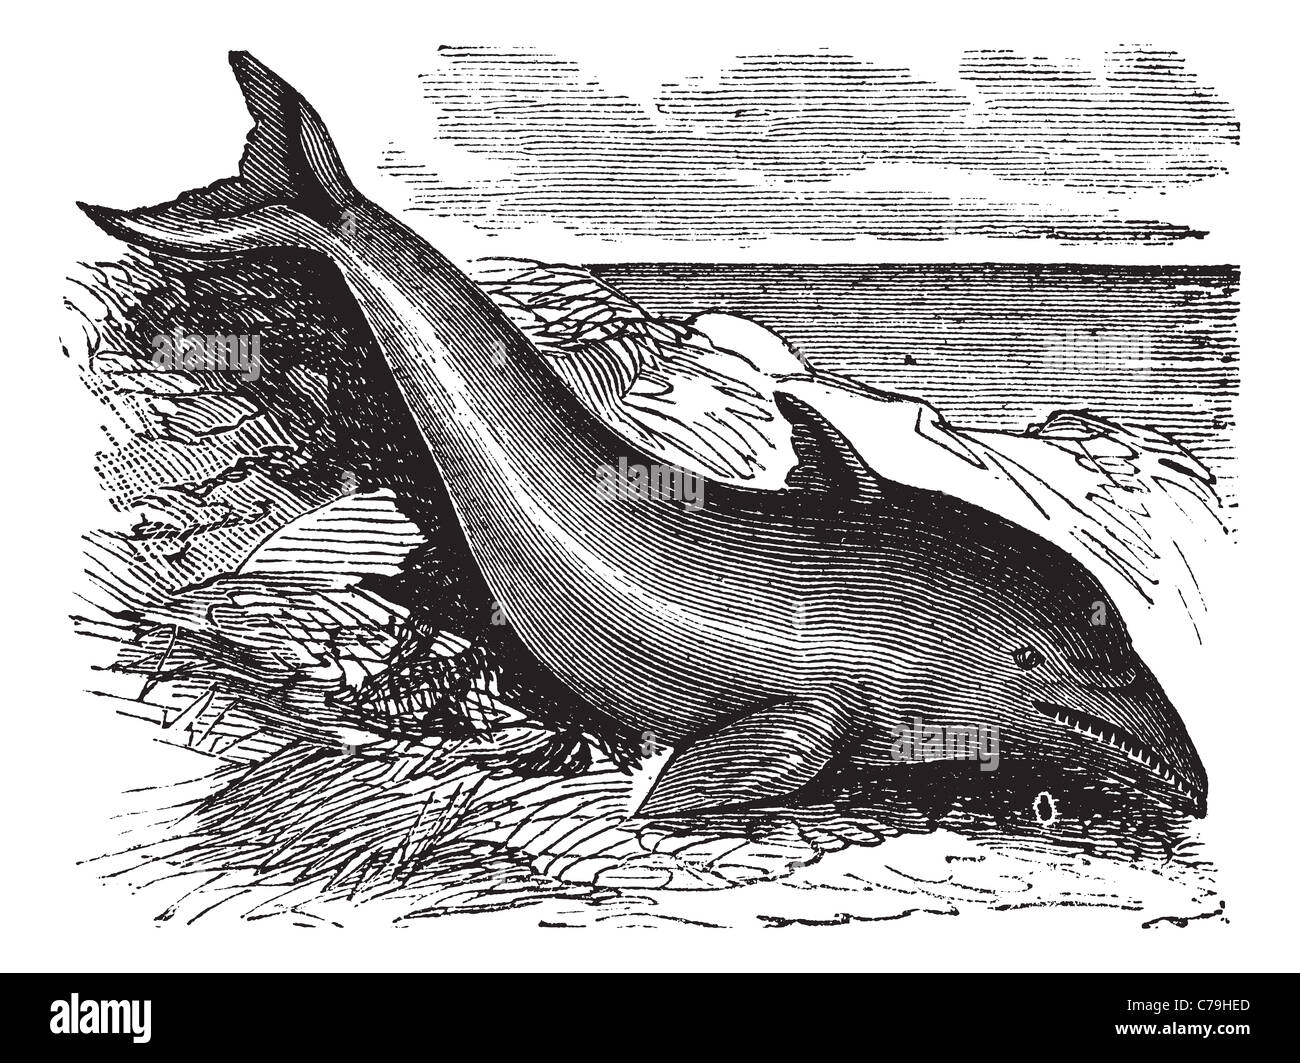 Common Dolphin or Delphinus delphis or Delphinus capensis, vintage engraving. Old engraved illustration of a Common Dolphin. Stock Photo